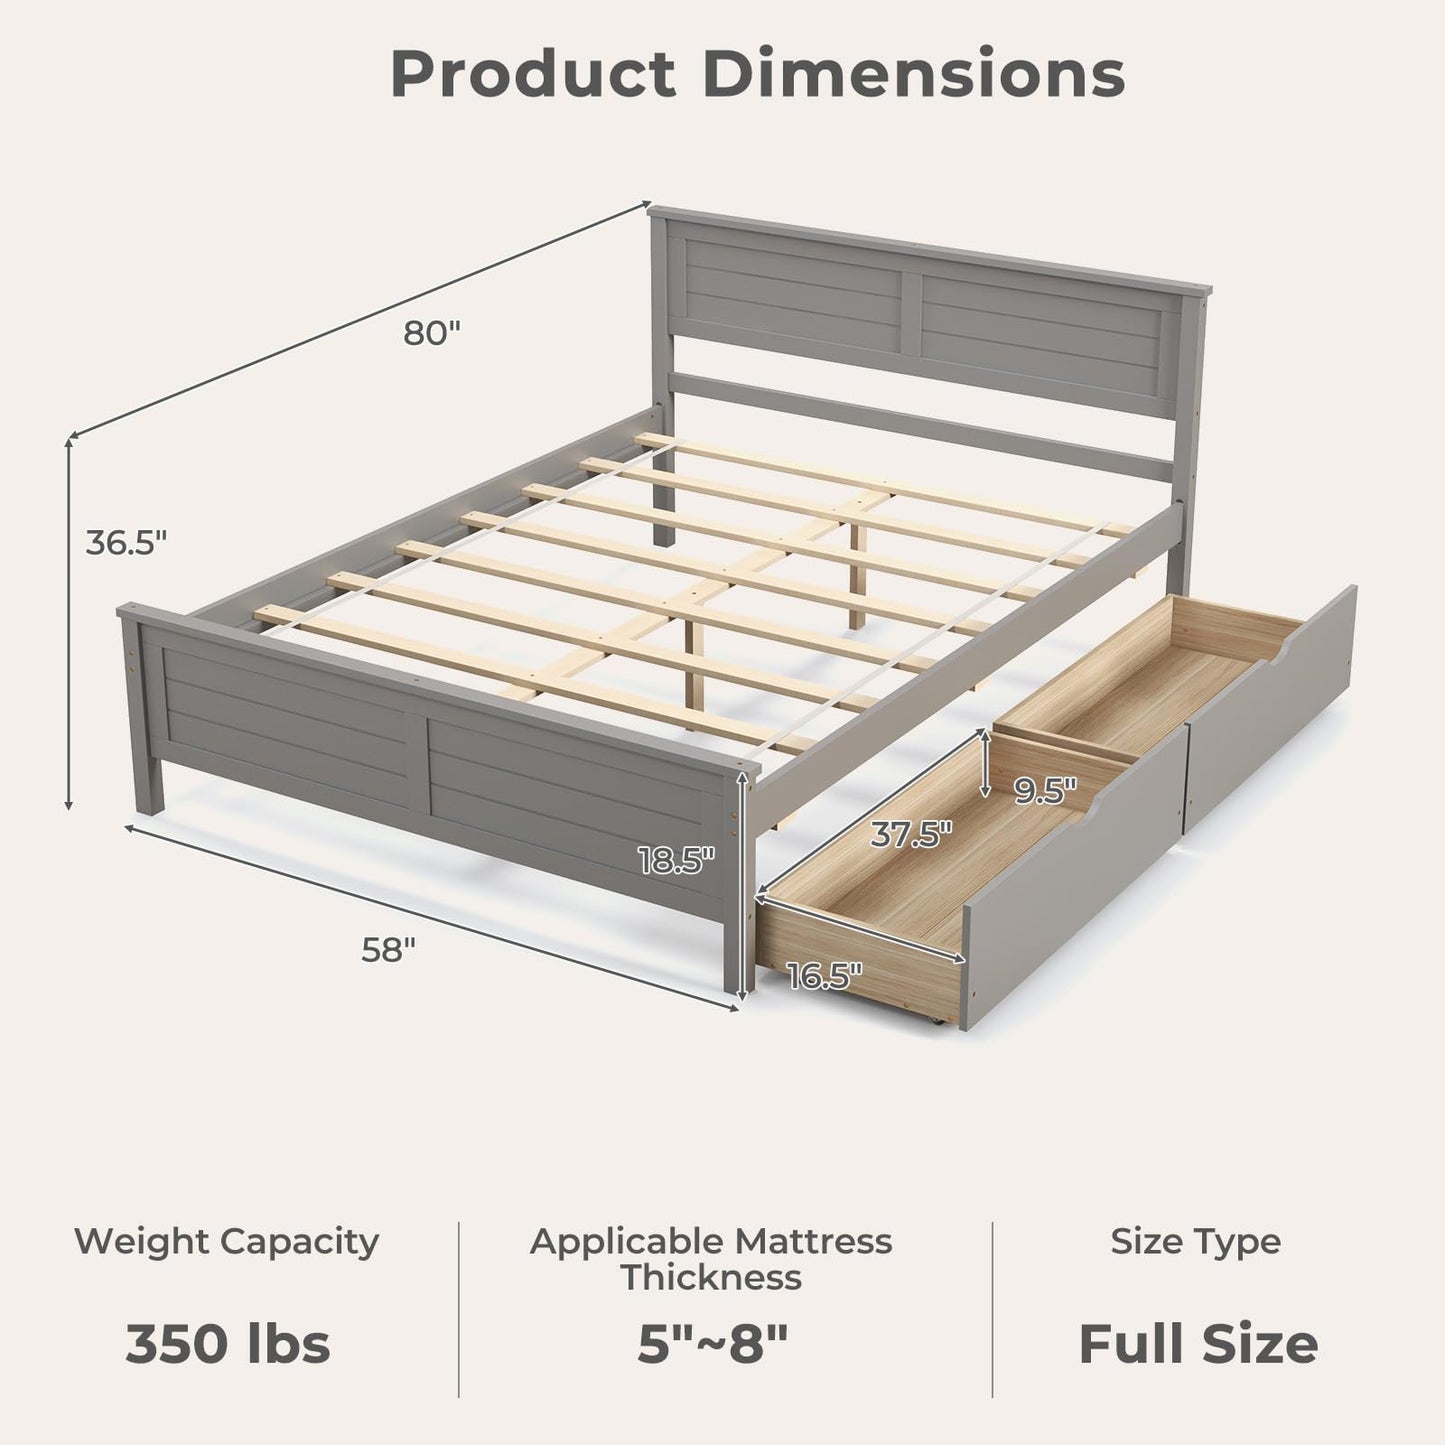 Giantex Wood Full Size Bed Frame with 2 Storage Drawers, Solid Wood Platform Bed with Headboard, Wooden Slats Mattress Foundation, No Spring Needed,